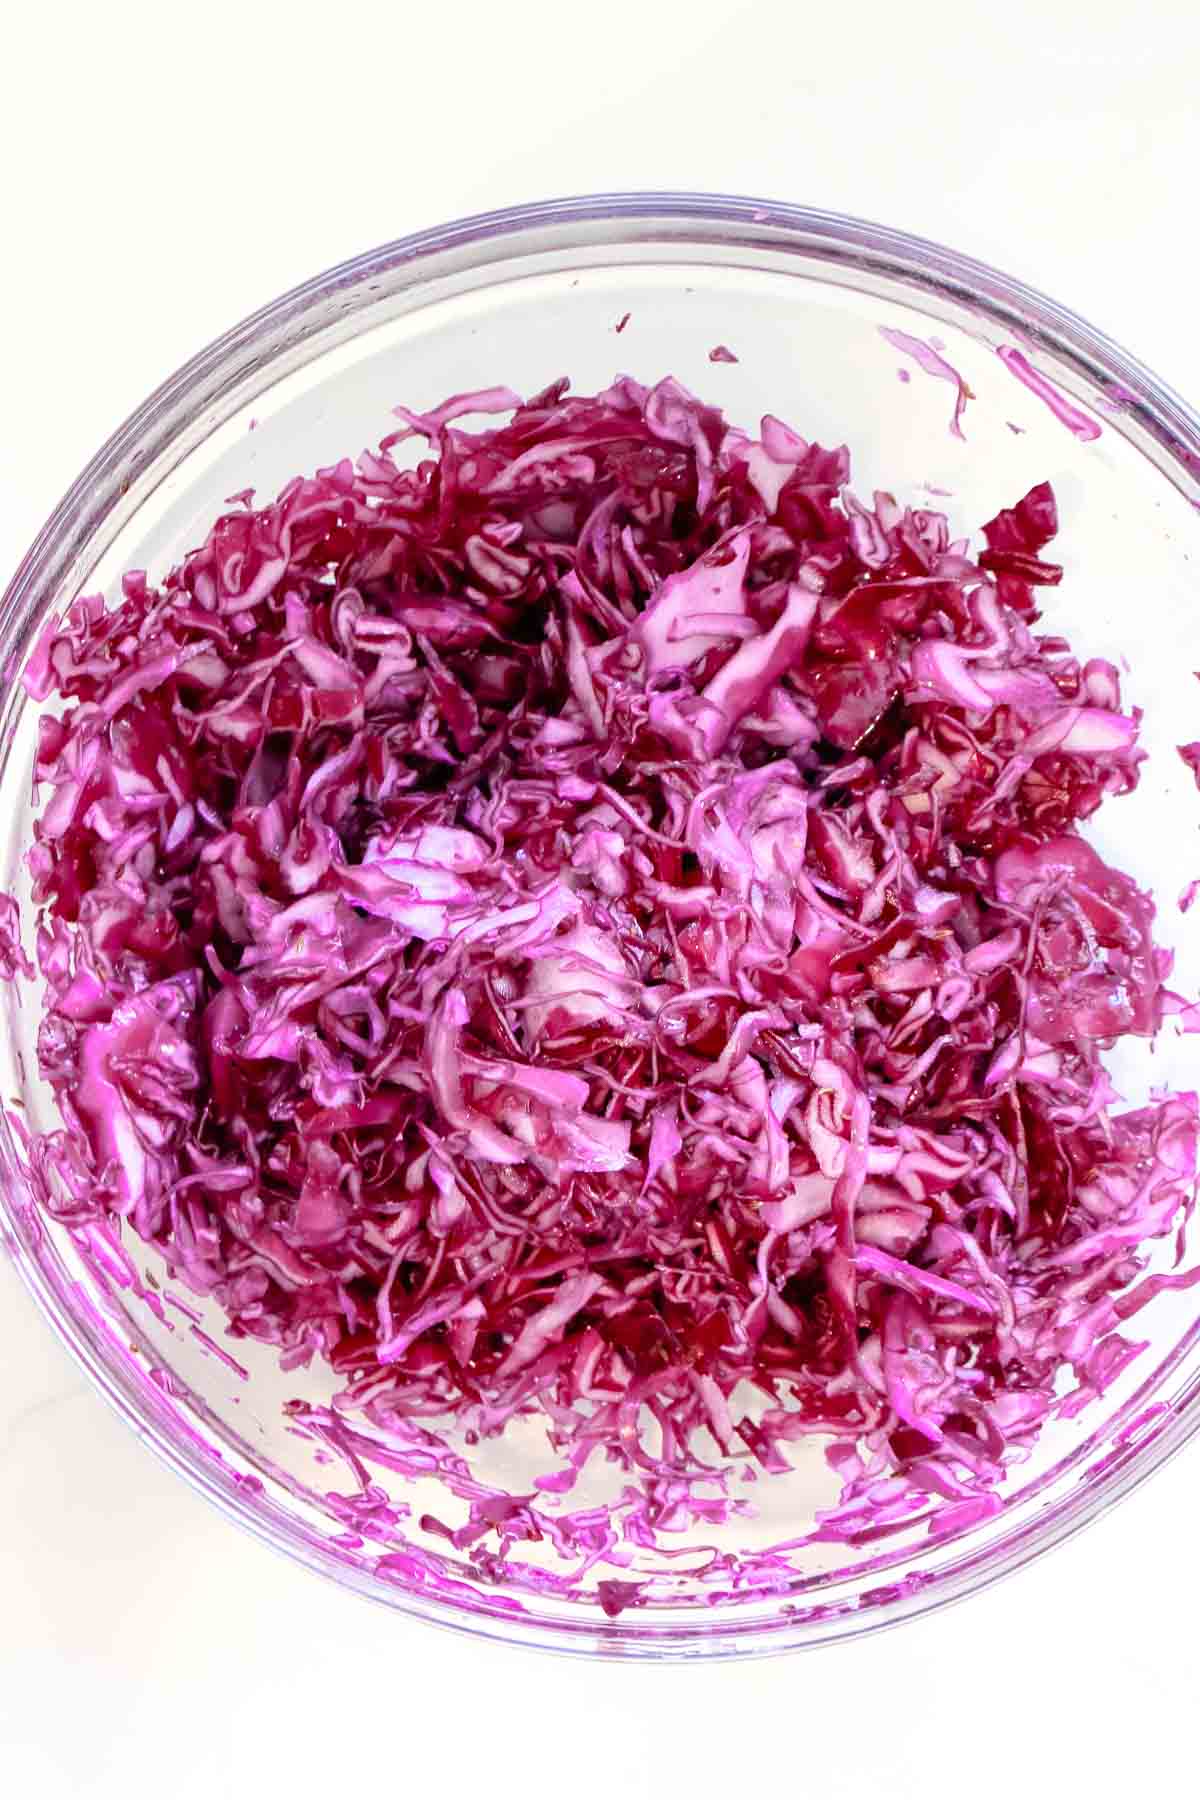 massaged red cabbage in glass bowl